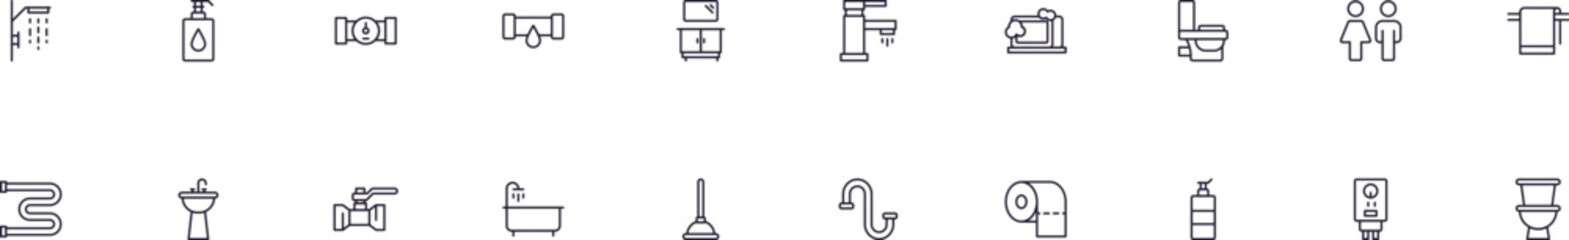 Plumbing linear symbols bundle. Vector collection for web sites, newspapers, apps, infographics